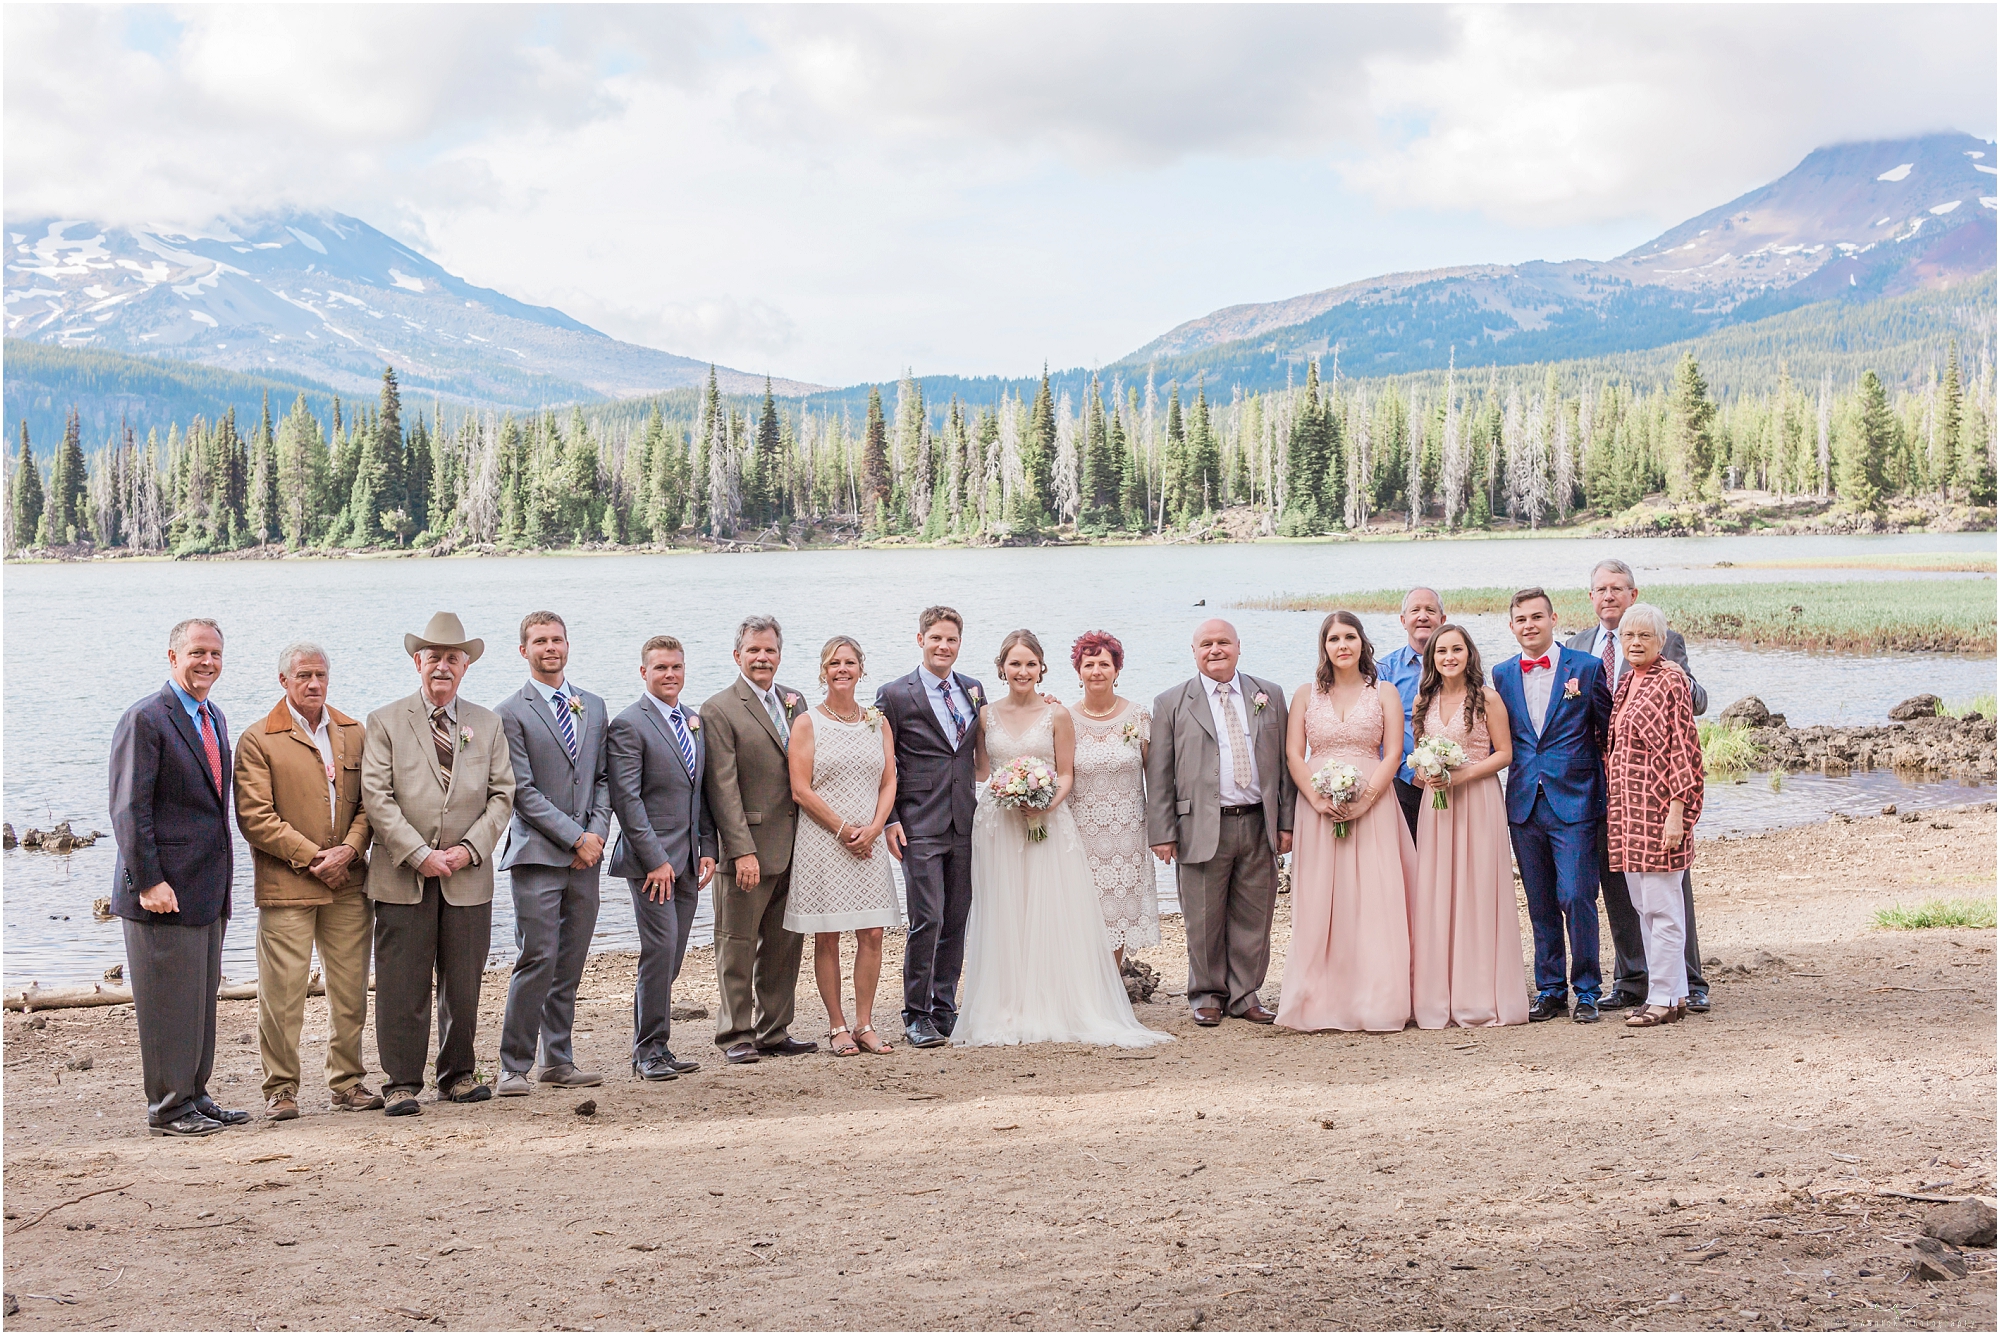 A very intimate wedding in Oregon. 